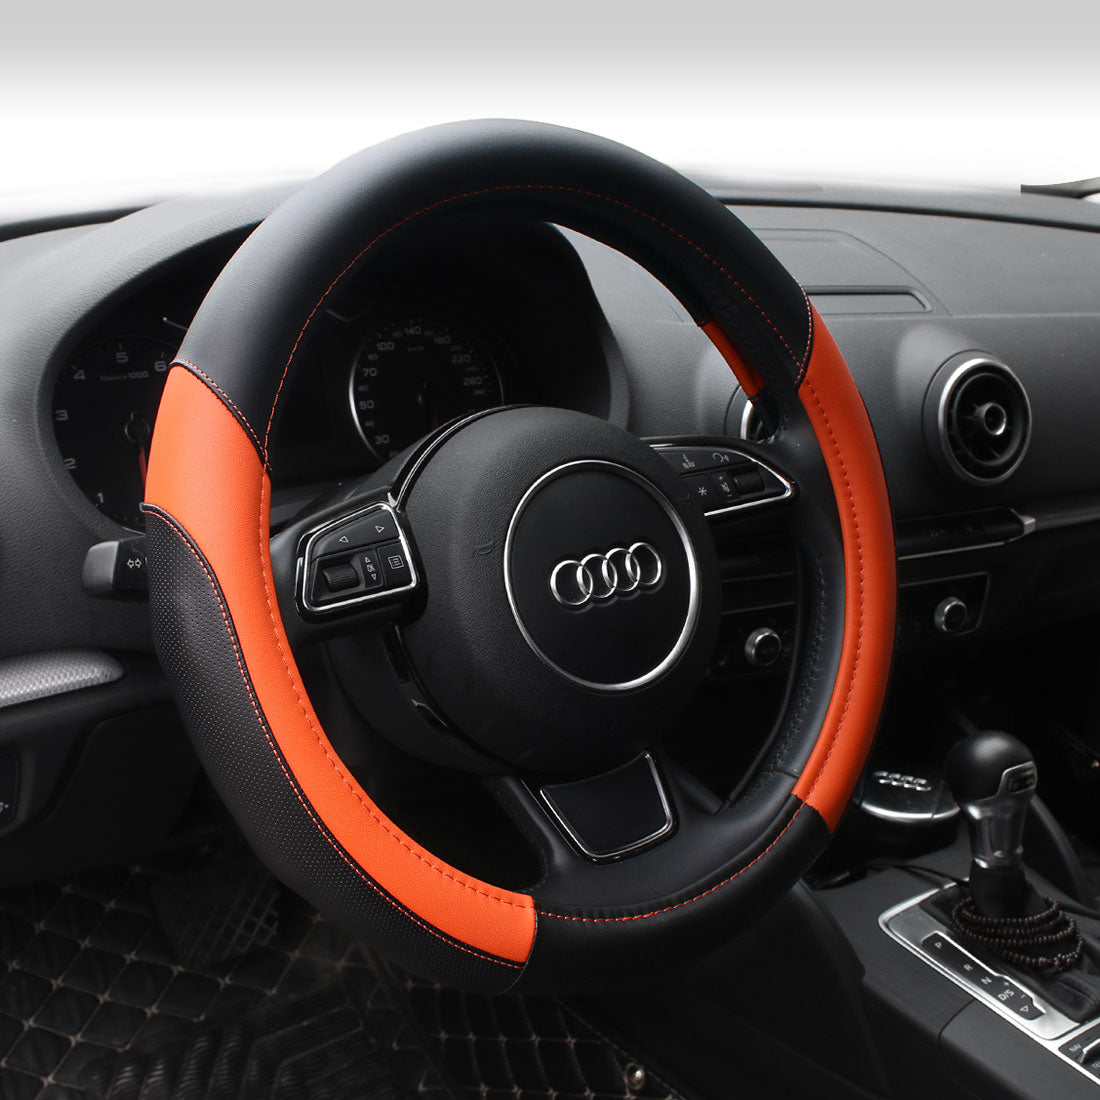 Graphic Car Steering Wheel Cover